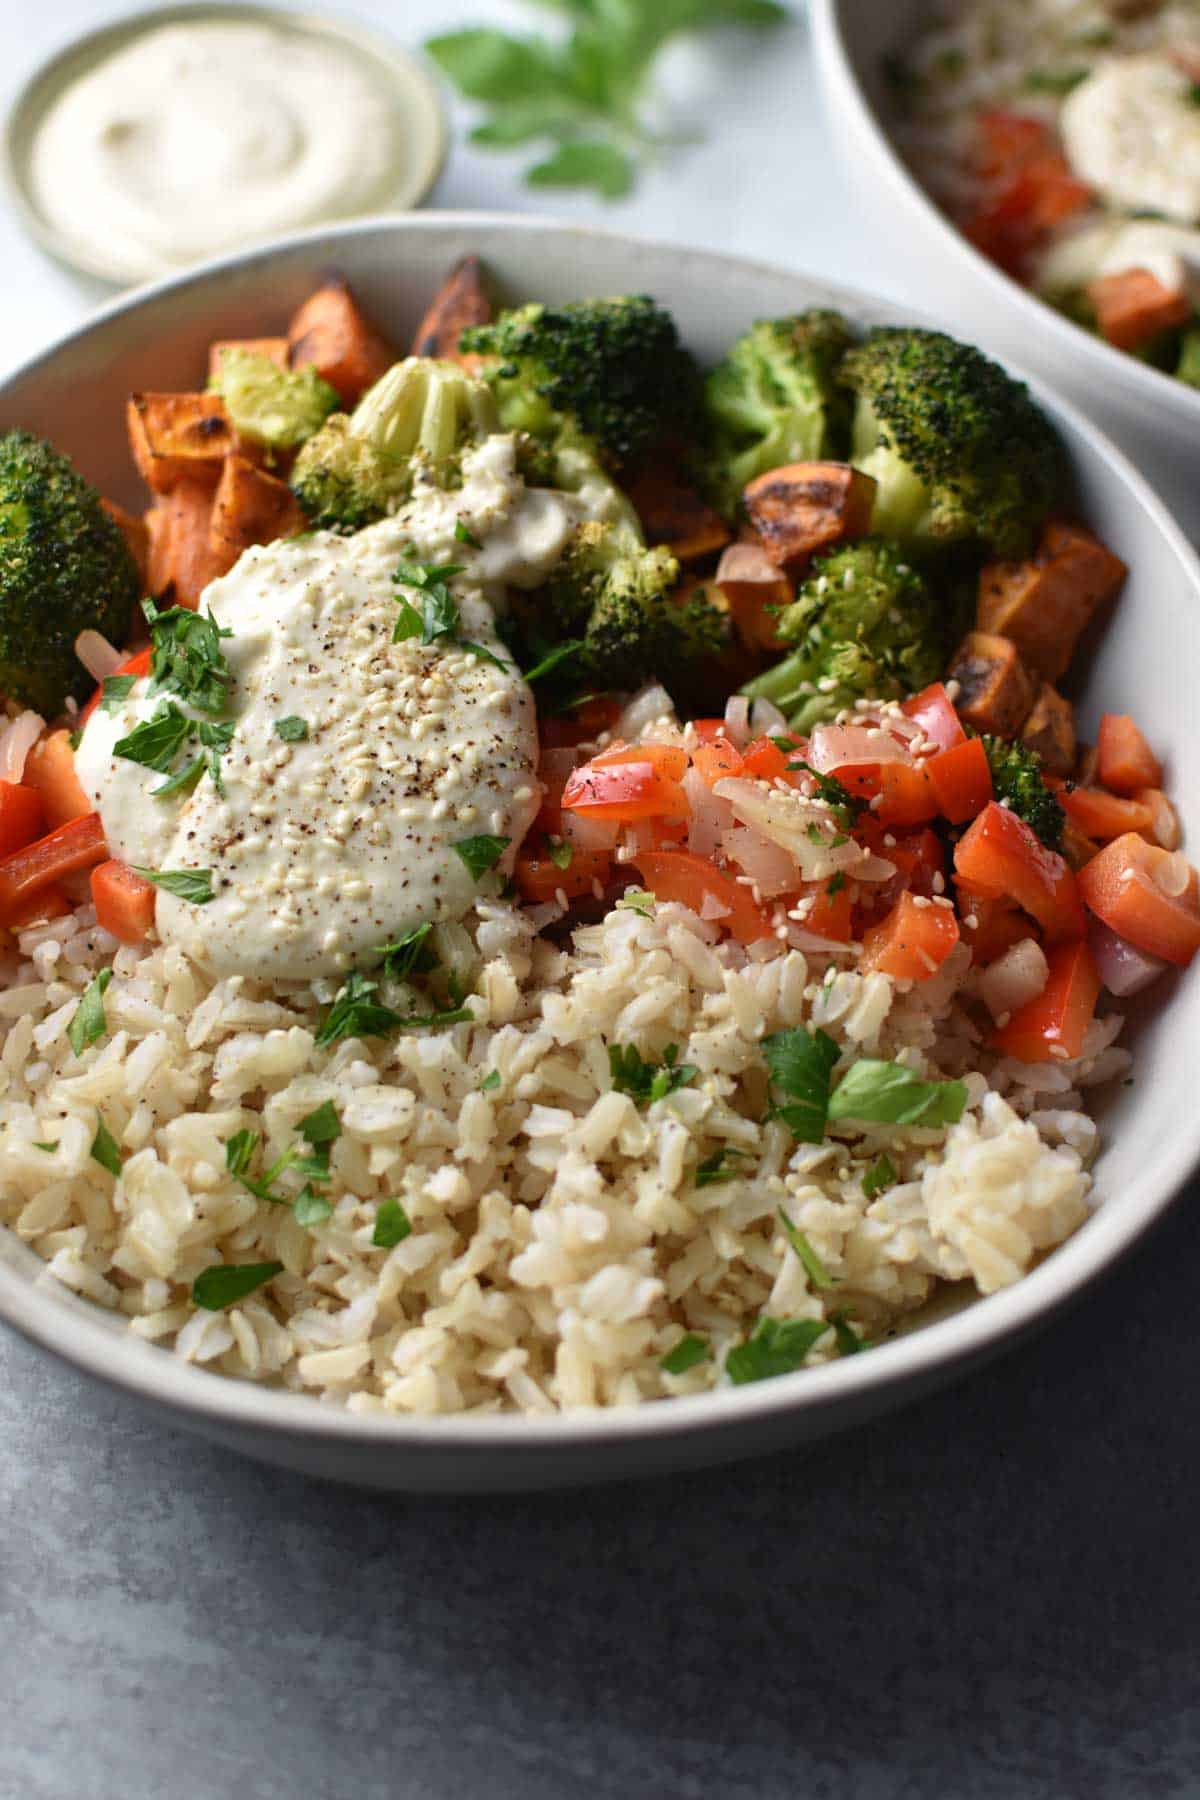 A bowl with sweet potatoes, broccoli, red pepper, rice, and a tahini sauce on top with sesame seeds.